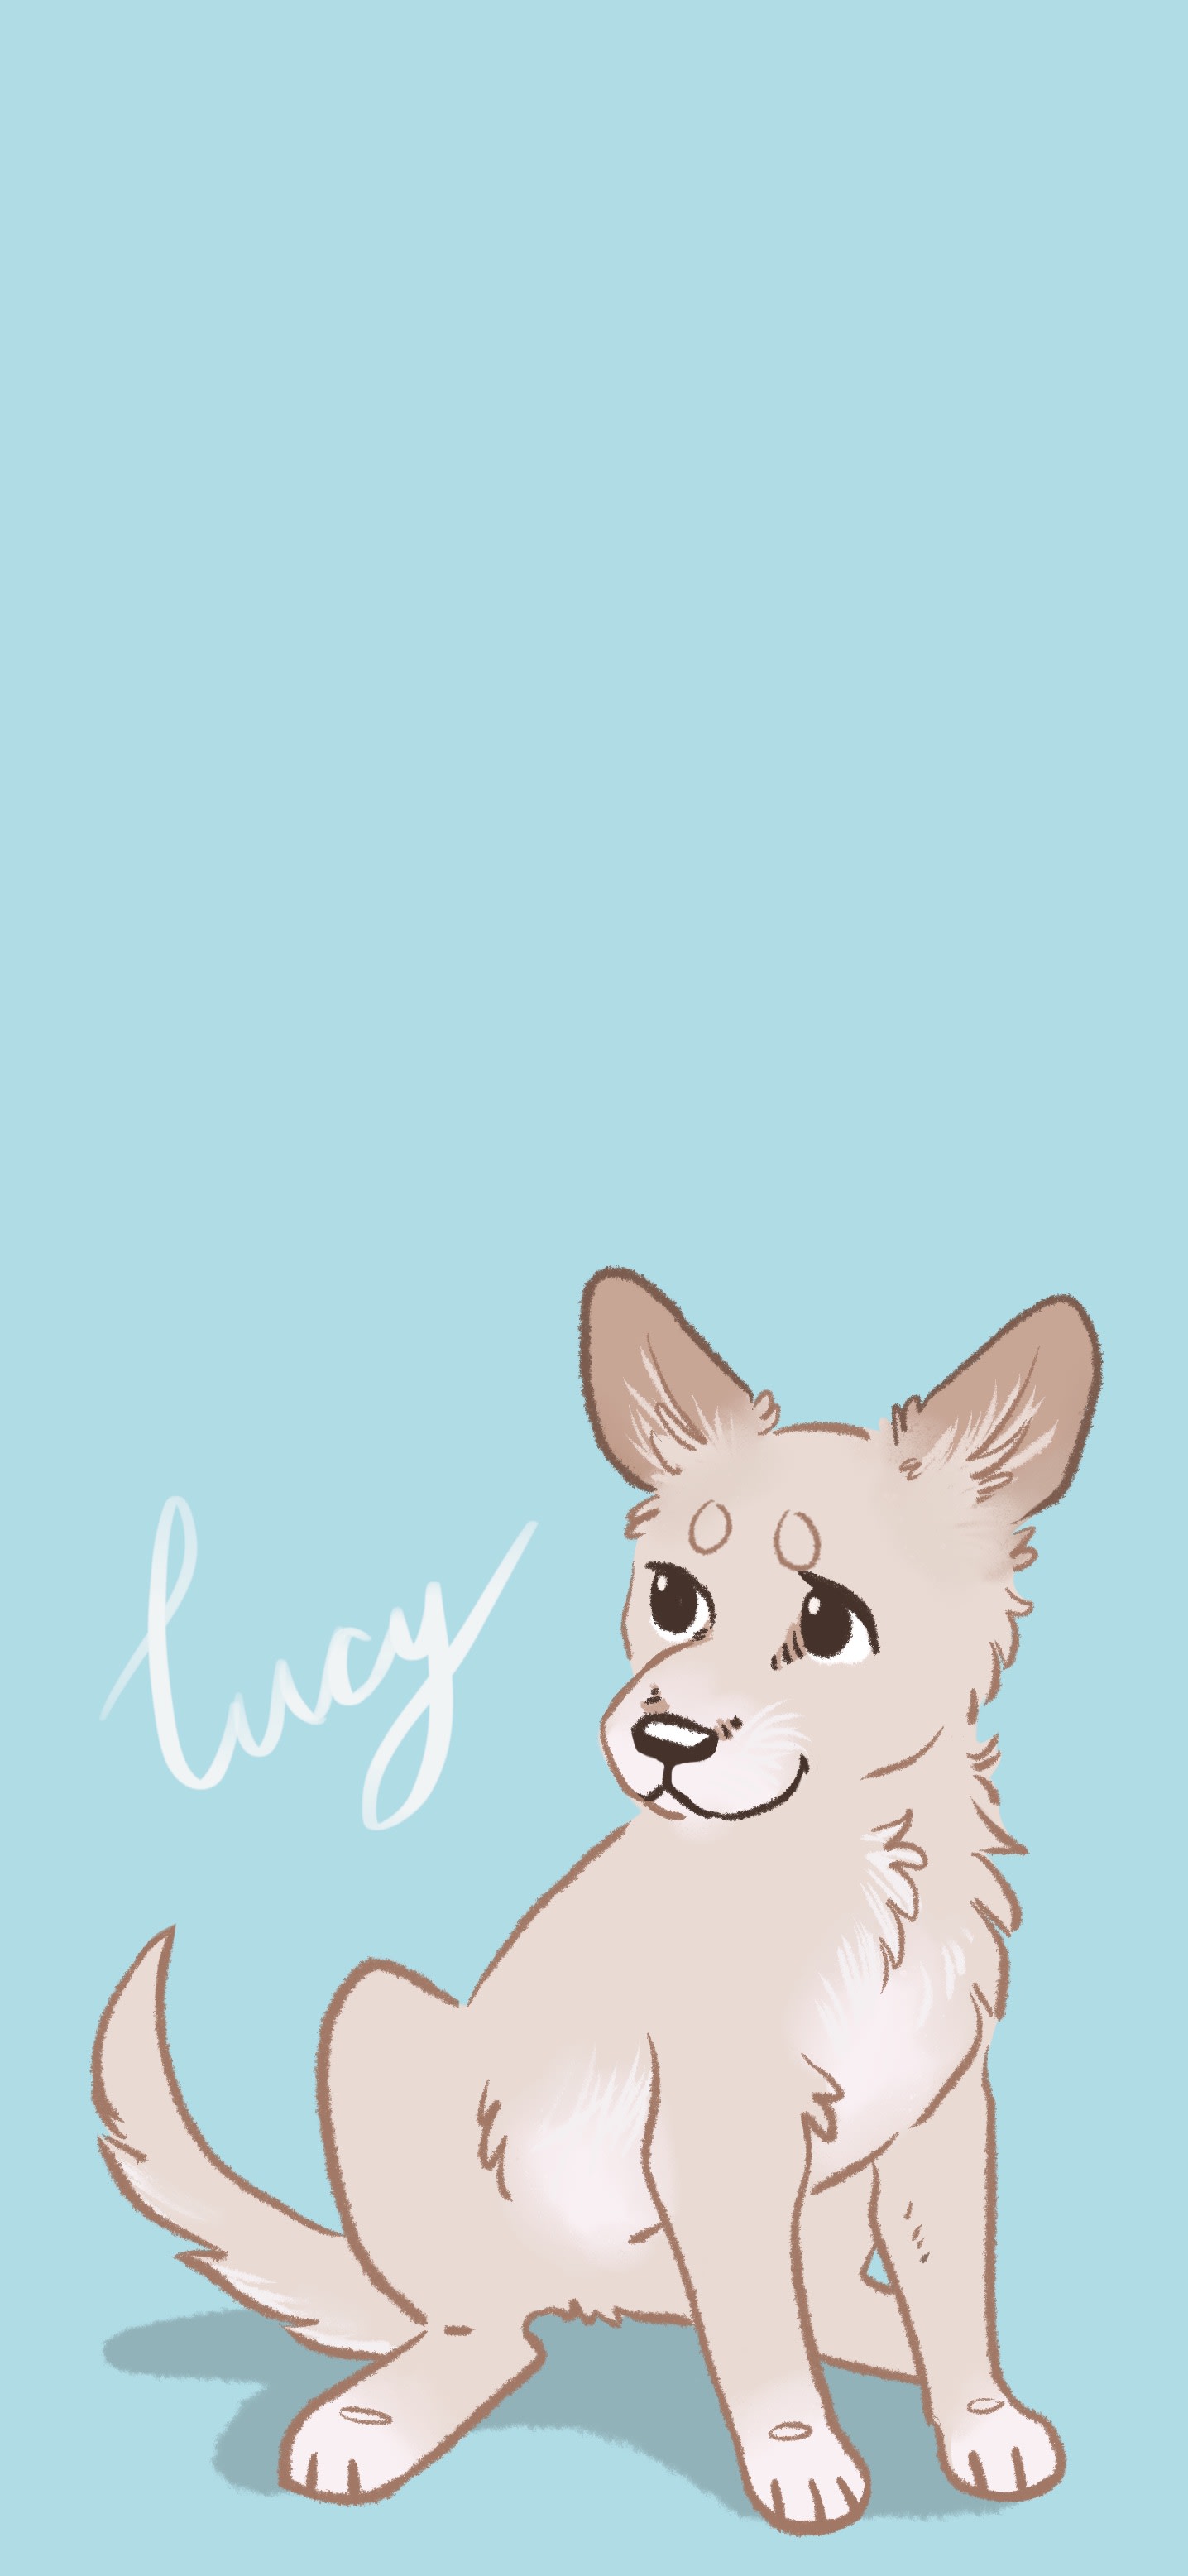 Draw a cute iphone wallpaper of your dog or cat by Nancyberumen | Fiverr